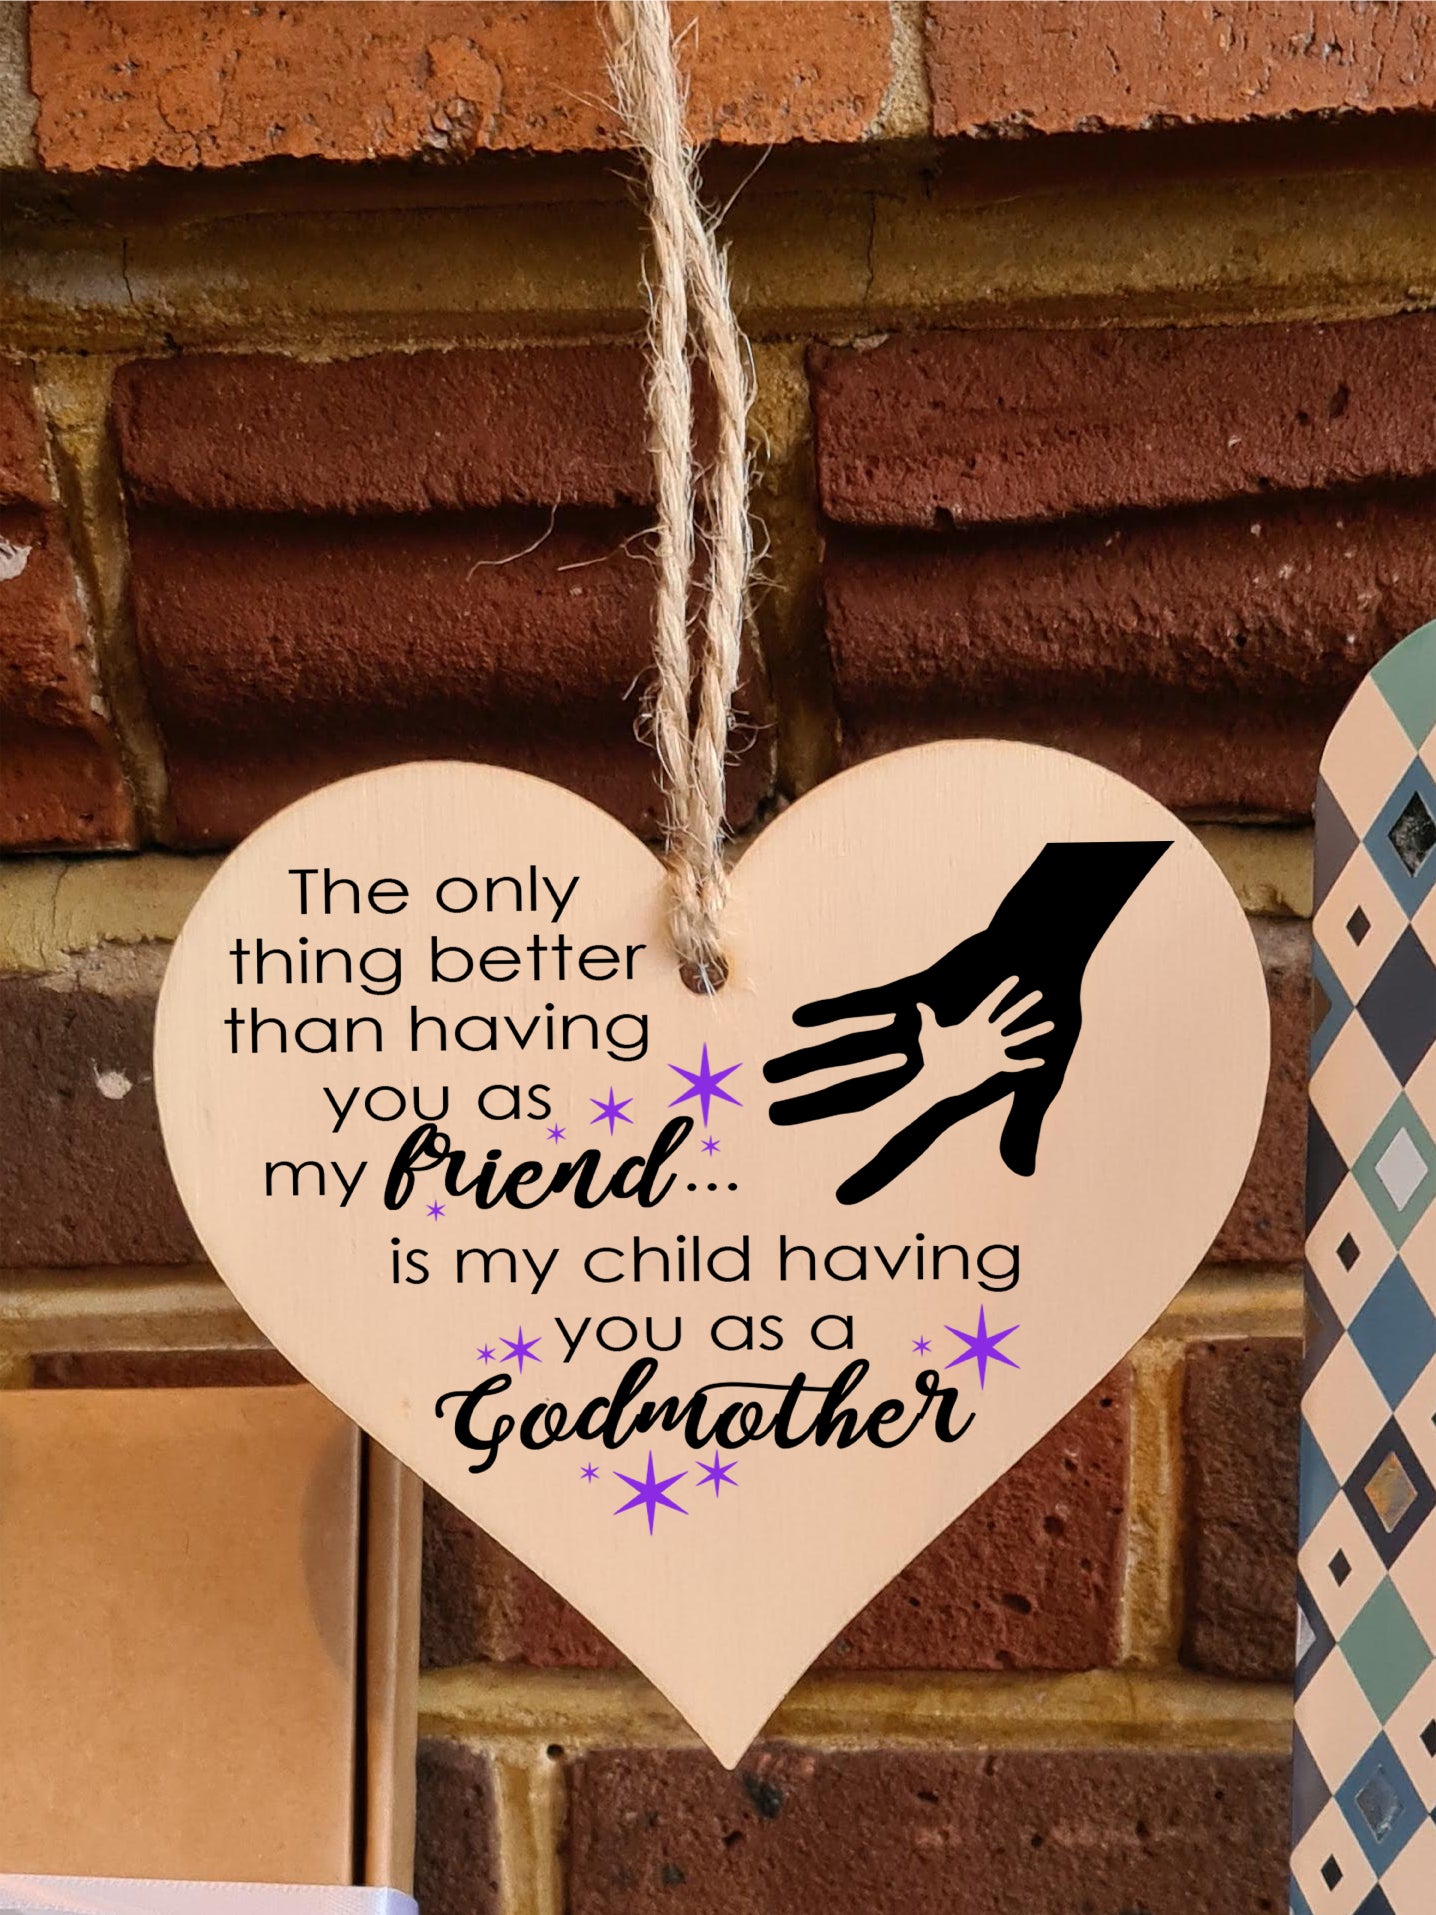 Handmade Wooden Hanging Heart Plaque Gift for Friend Godmother Loving Thoughtful Thank You Keepsake